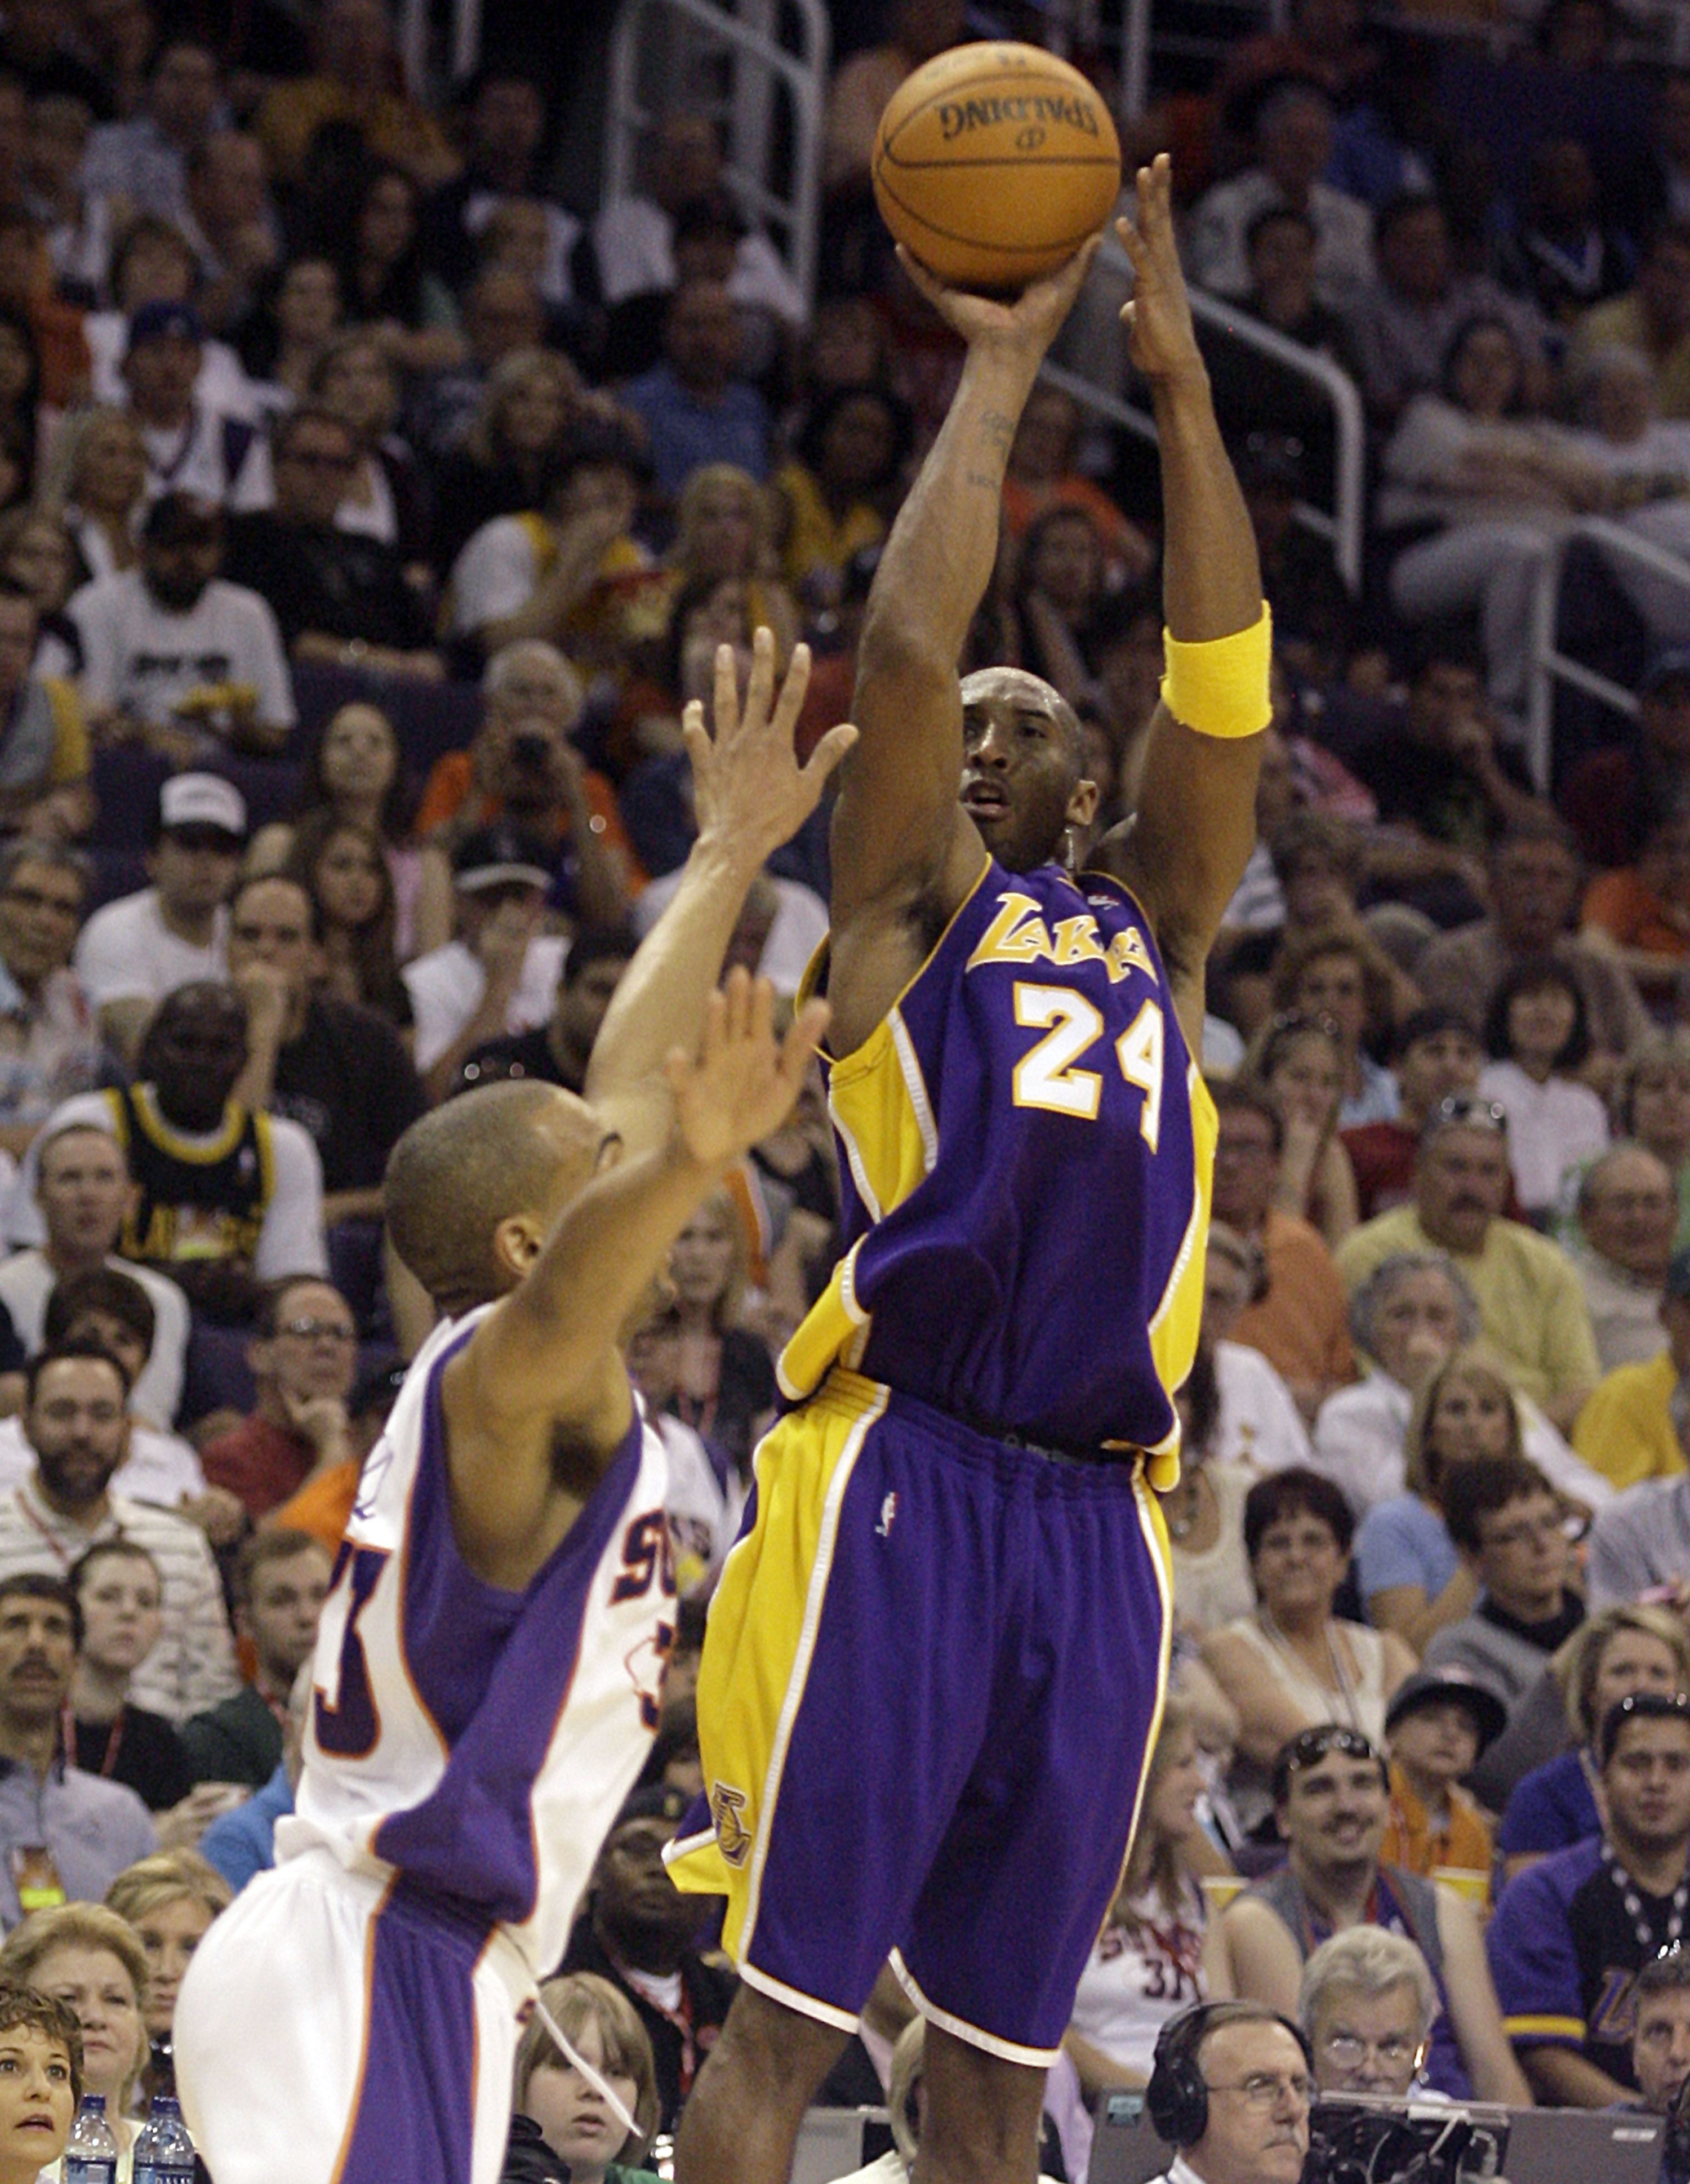 Without Nash, Suns overcome Kobe to beat L.A.